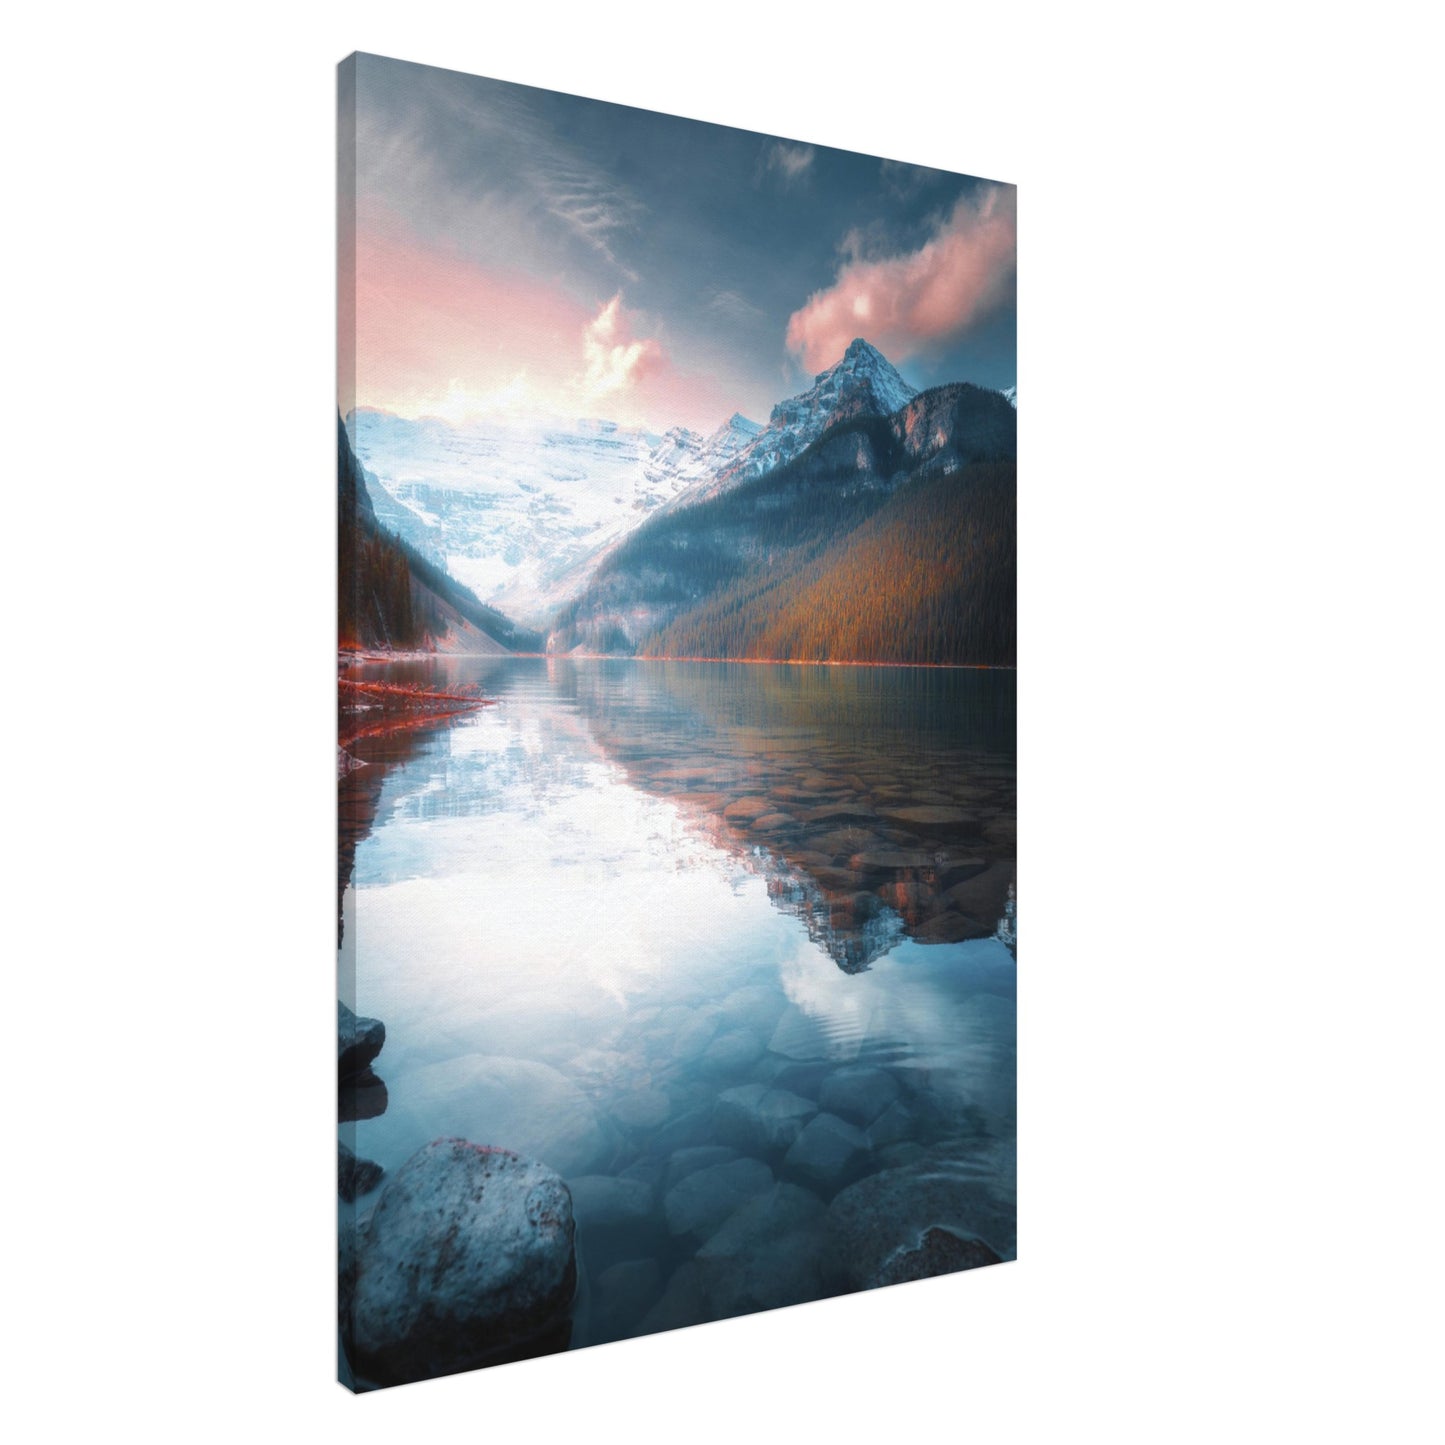 Lake of the little fishes - Canvas